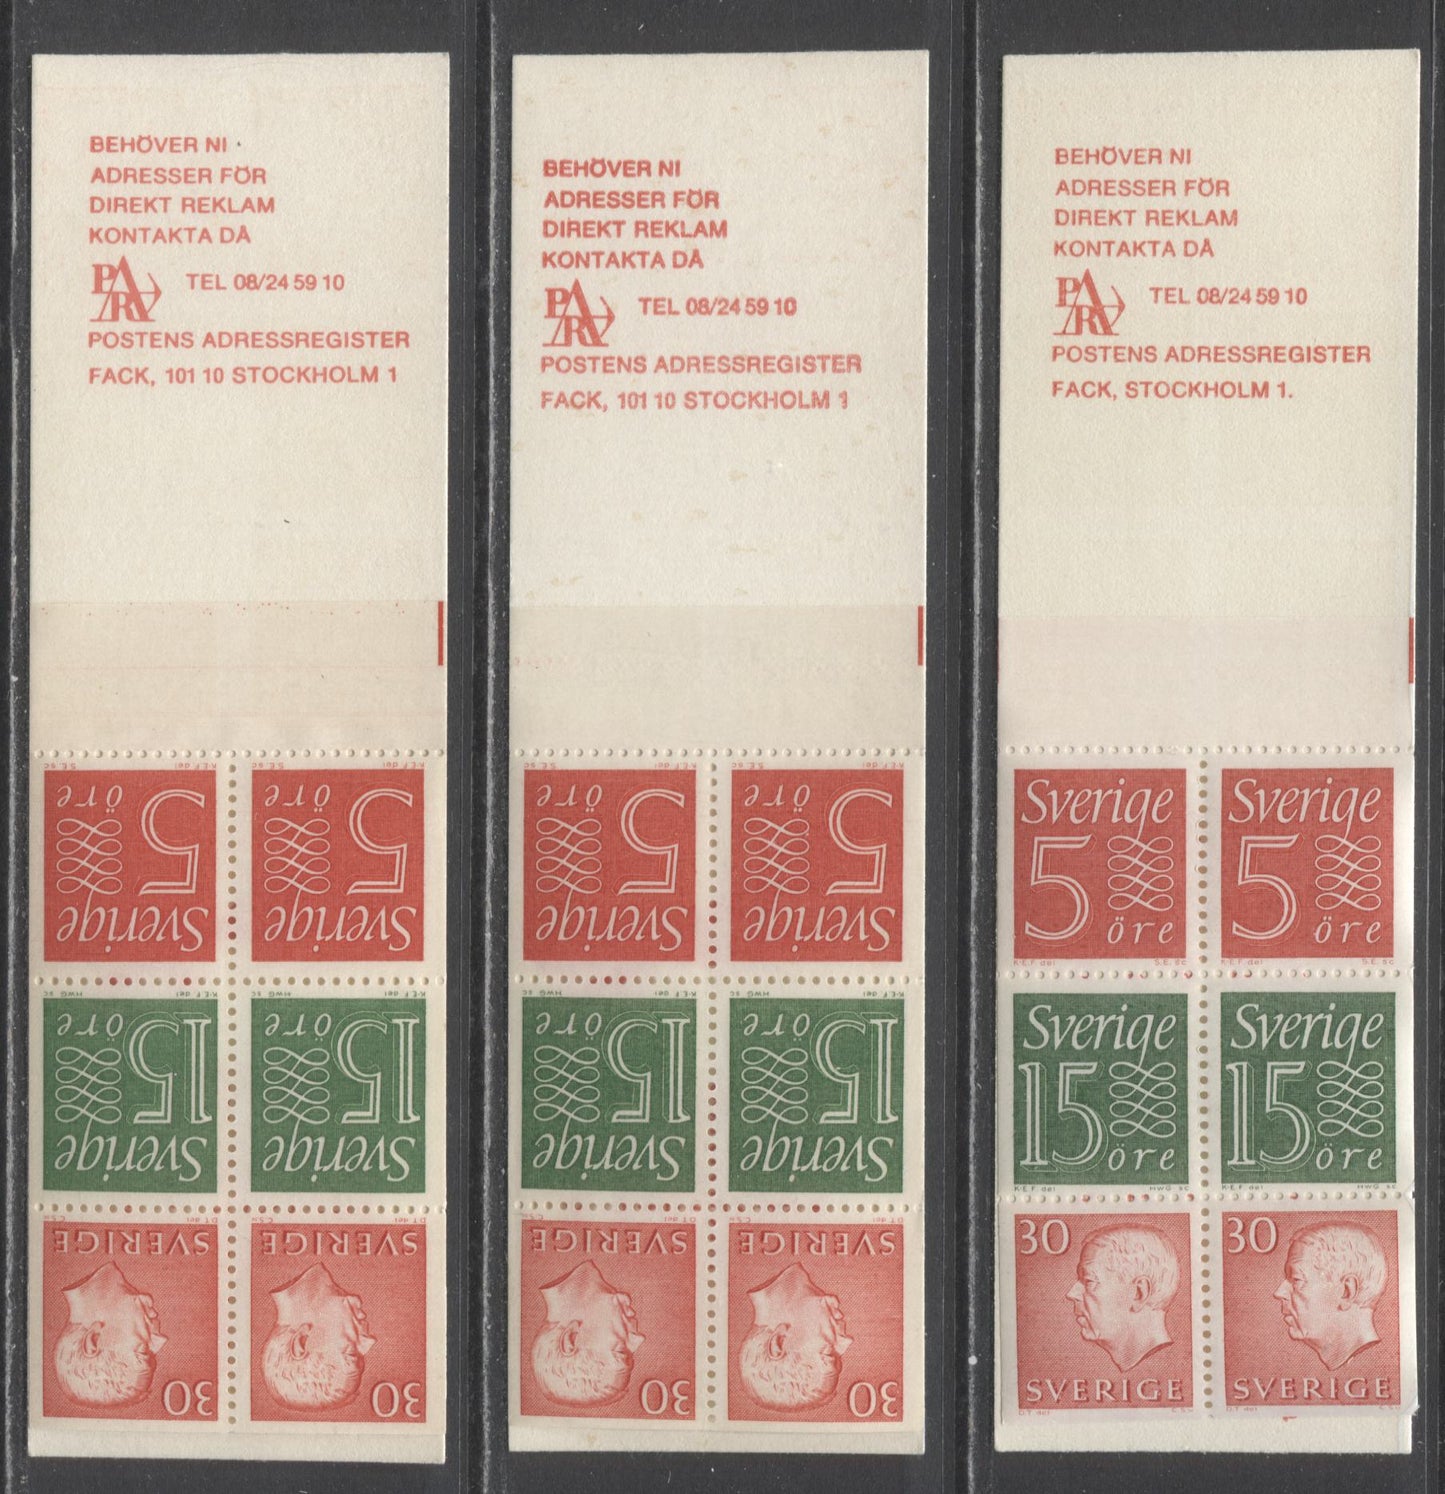 Lot 184 Sweden SC#668a (Facit #HA15B2R)/668a (Facit #HA15E1O) 1966 Re-Engraved King Gustav VI Adolf Definitive Issue, Different Cream Covers, Upright And Inverted Panes, 4 VFNH Booklets of 6 (2 +2 +2),  Estimated Value $18